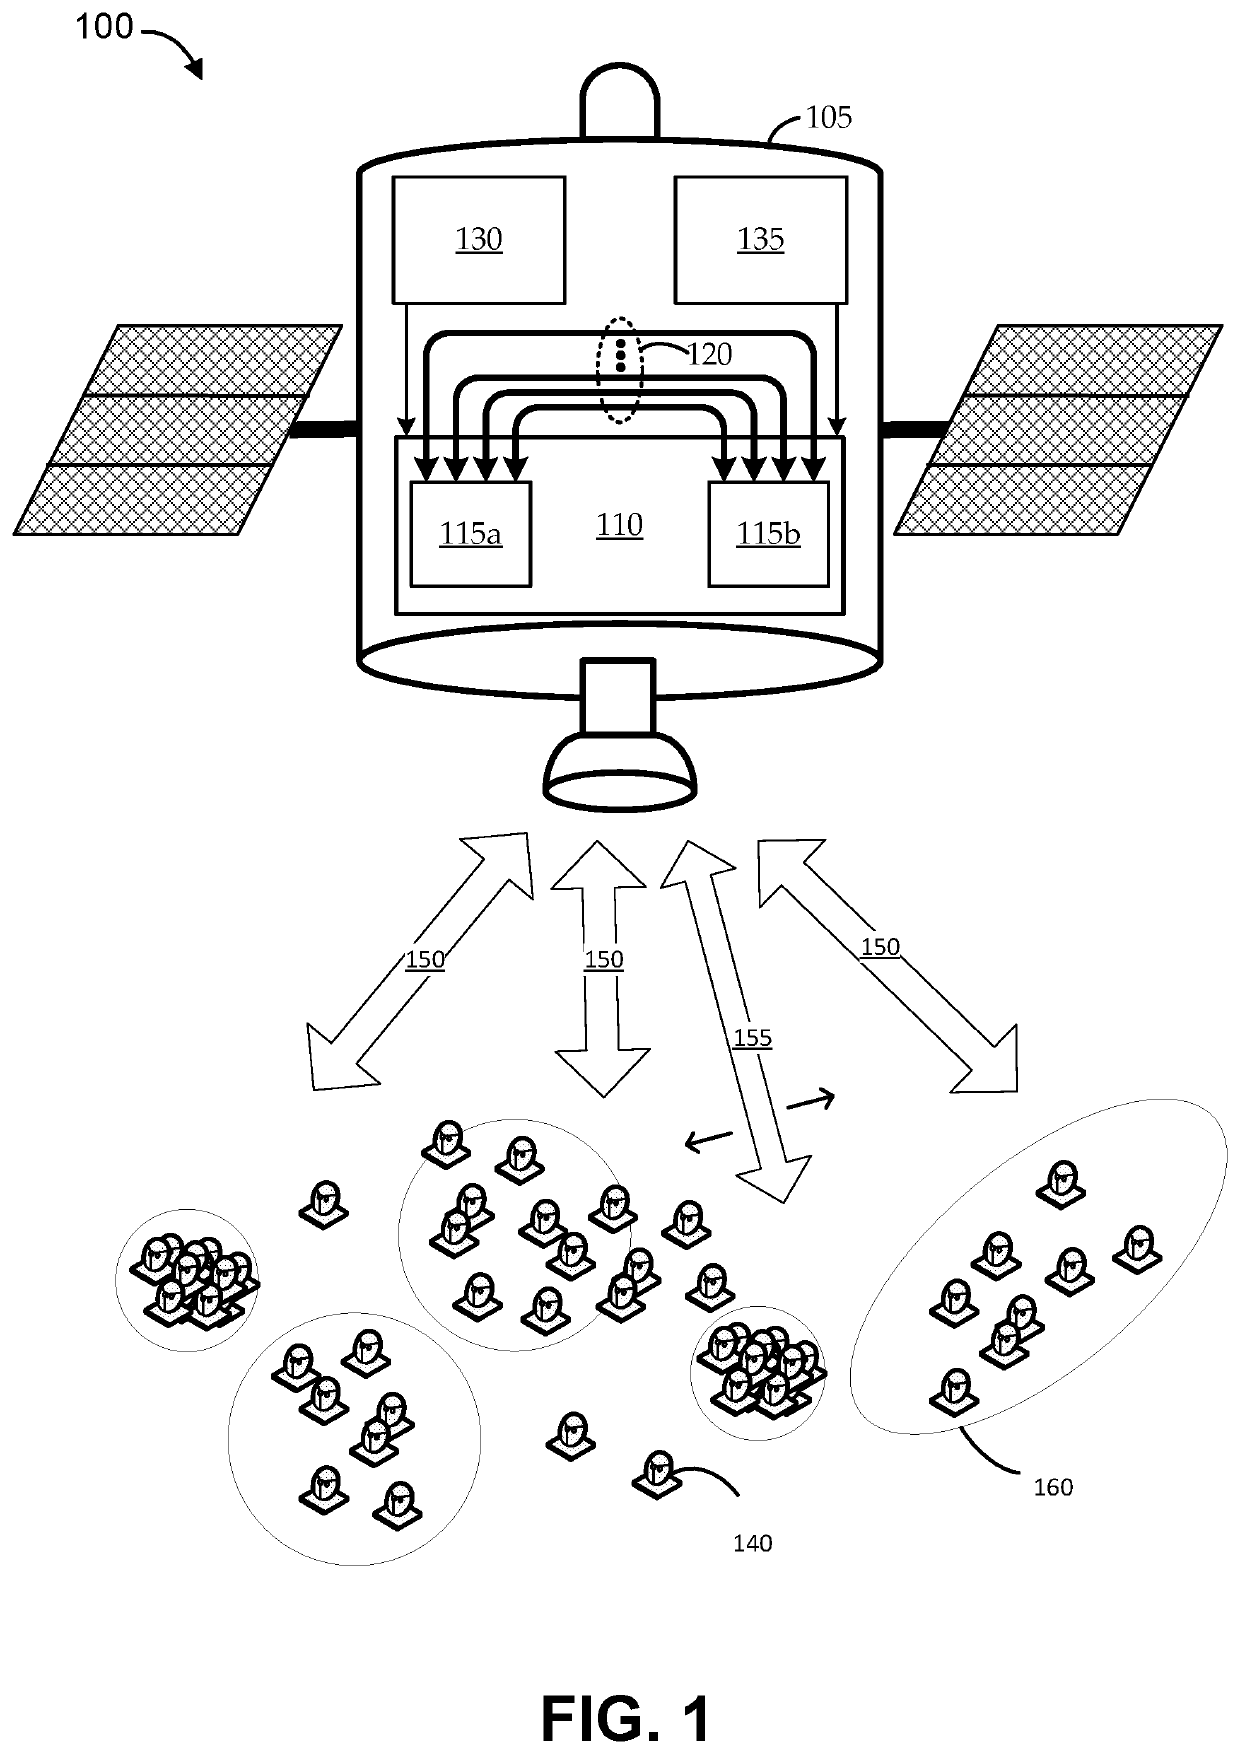 High-throughput satellite with sparse fixed user beam coverage